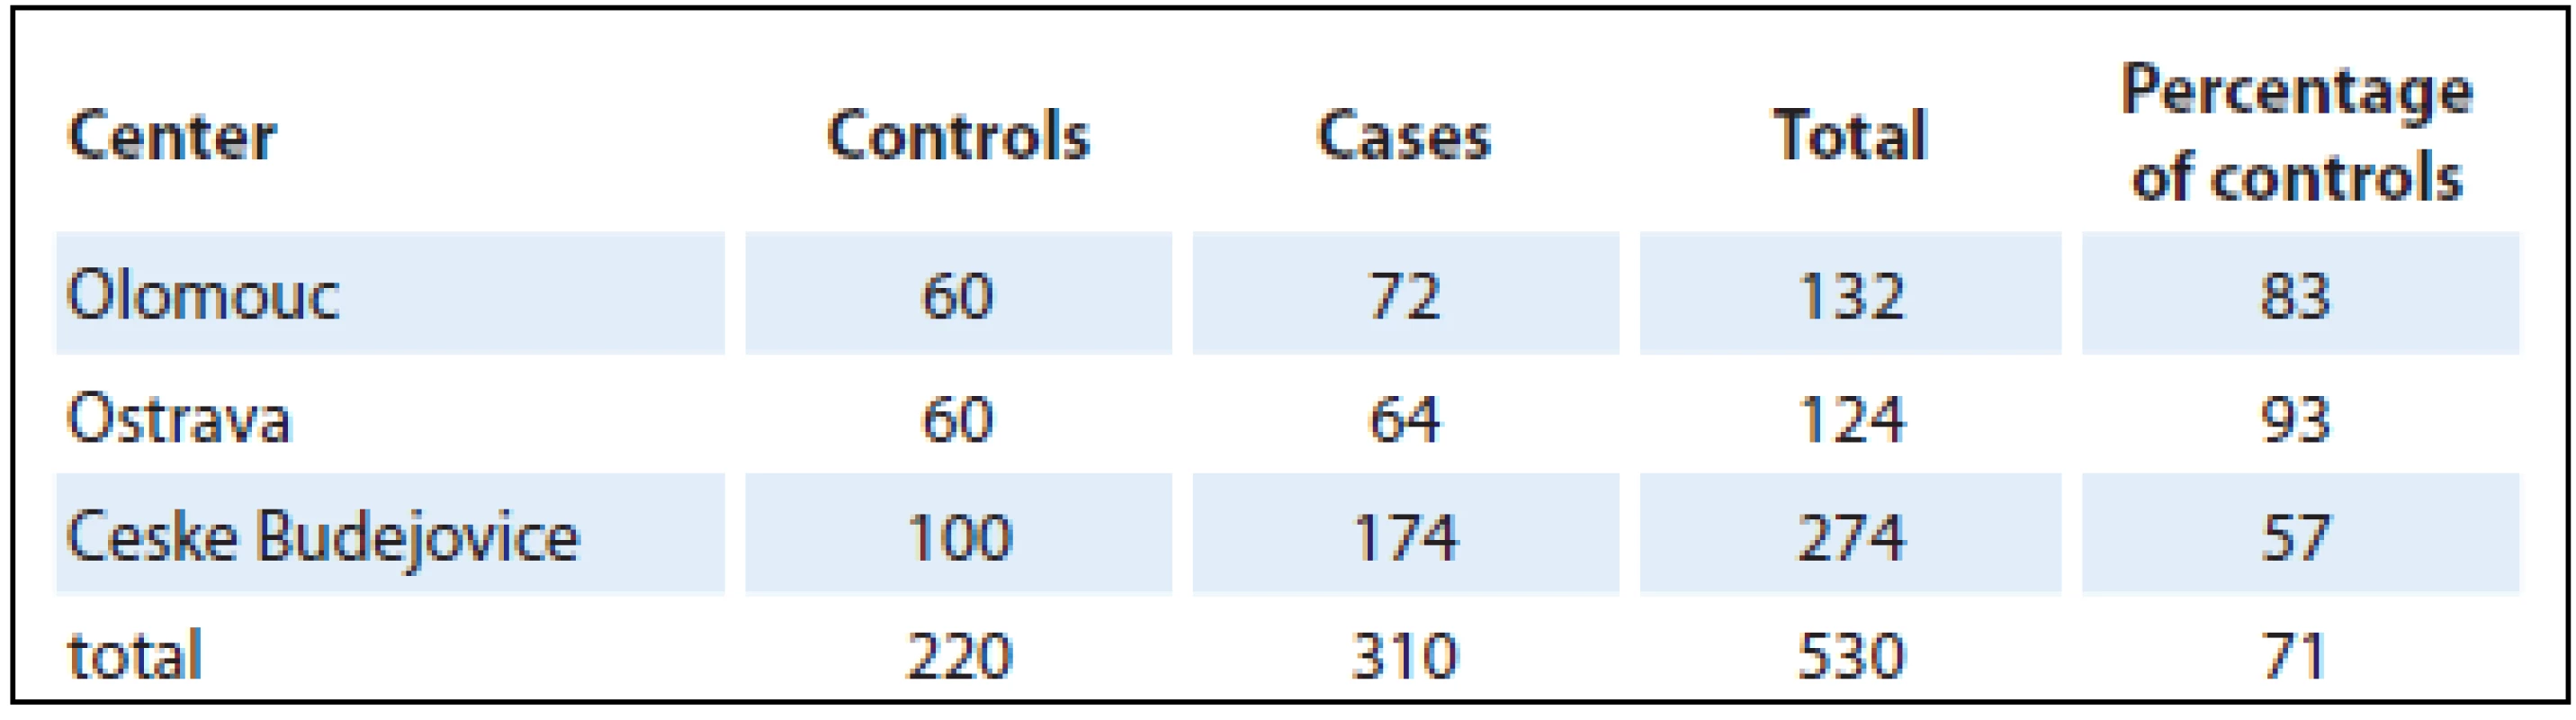 Proportions of cases and controls in individual centers.